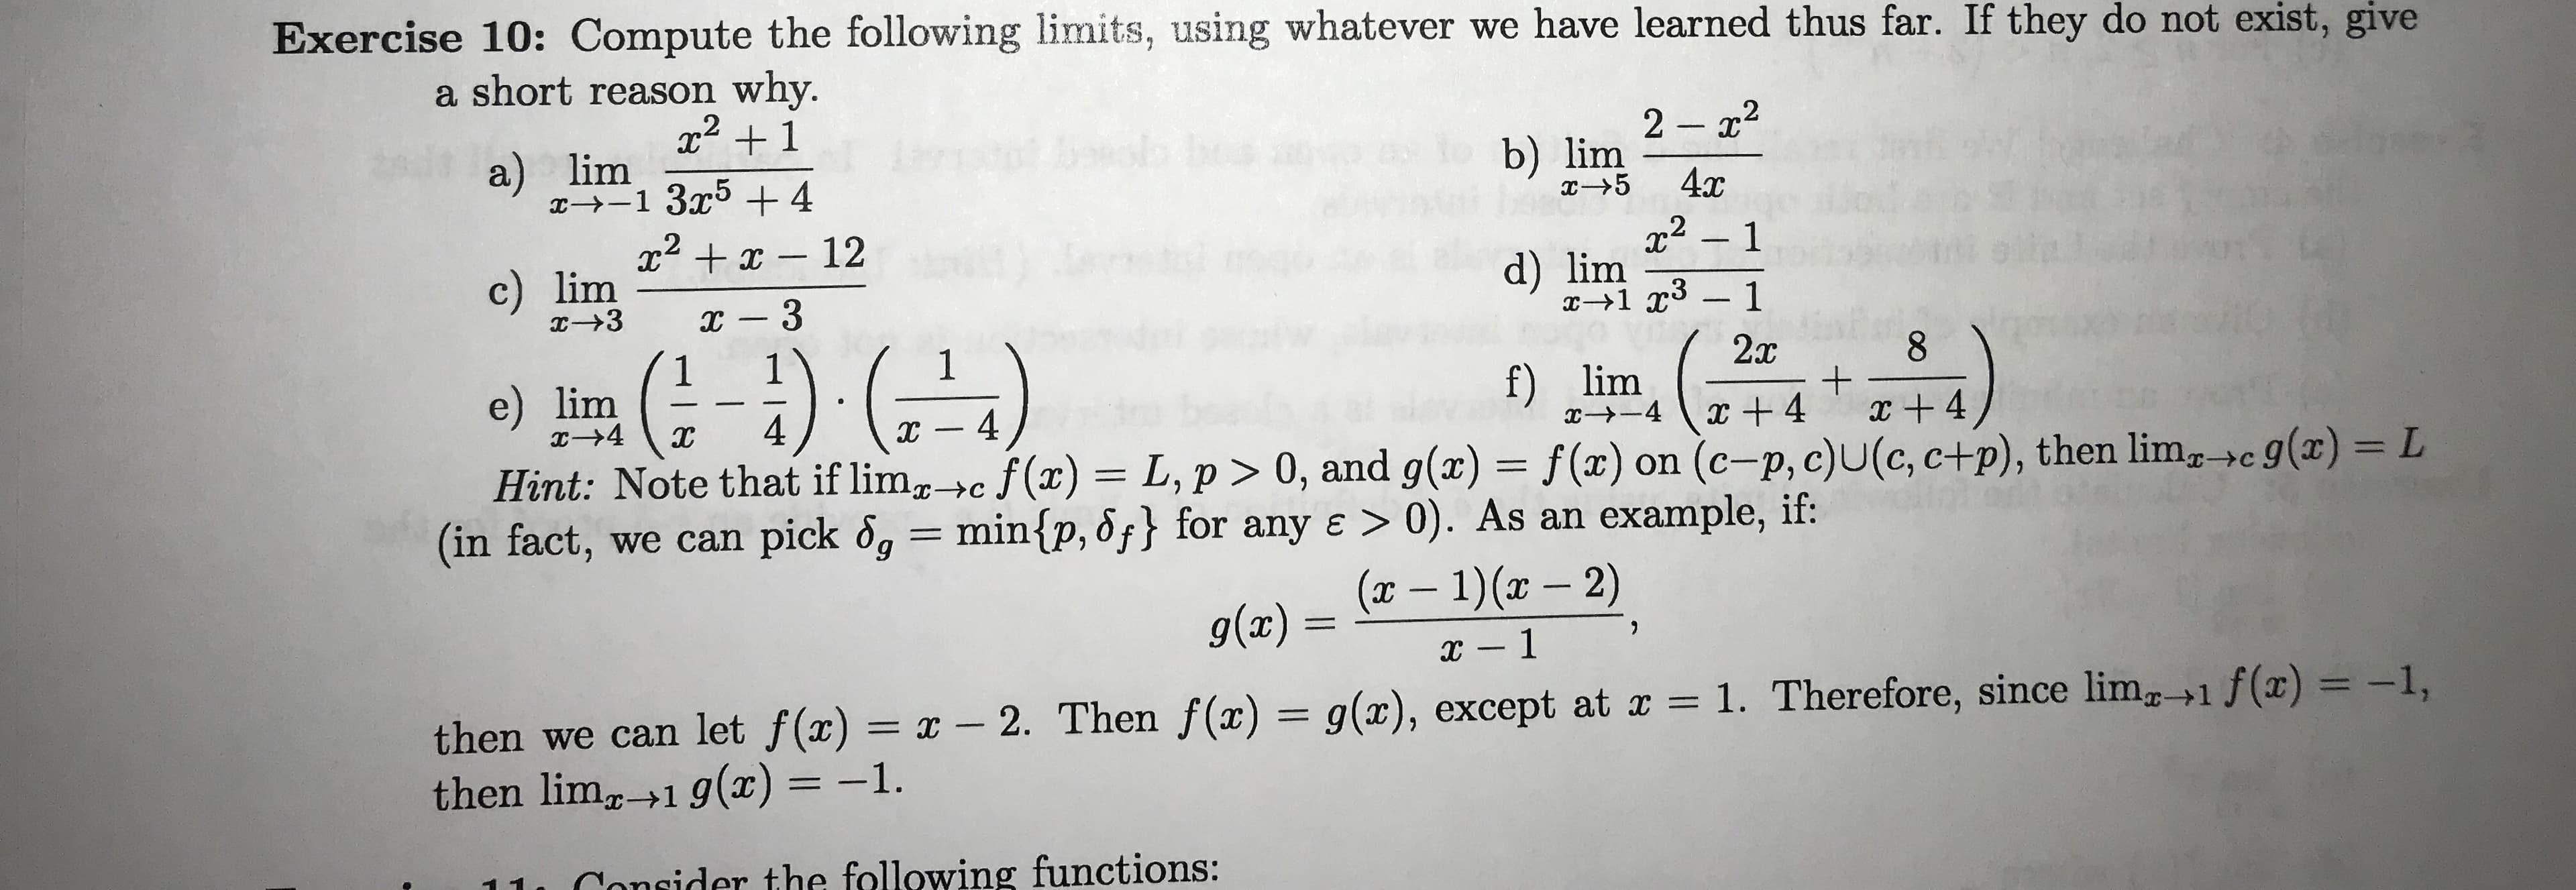 Exercise 10: Compute the following limits, using whatever we have learned thus far. If they do not exist, give
a short reason why.
x1
2 2
a) lim
x 1 354
bs
b) lim
4x
x5
x2x12
2-1
c) lim
d) lim
x-1 1
I -3
a 3
-) )
22x
8
e) lim
I-4
f) lim
4
IXC
4
4
4
Hint: Note that if limc f(x) L, p > 0, and g(x) = f(x) on (c-p, c)U(c, c+p), then lim c 9(x) = L
(in fact, we can pick og = min{p, df} for any e > 0). As an example, if:
9
(x-1)(x-2)
IC
g(ax) =
x -1
then we can let f(x) = x - 2. Then f(x) = g(x), except at x = 1. Therefore, since lim1 f(x) = -1,
then lim 1 g(x) = -1.
Canider the following functions:
